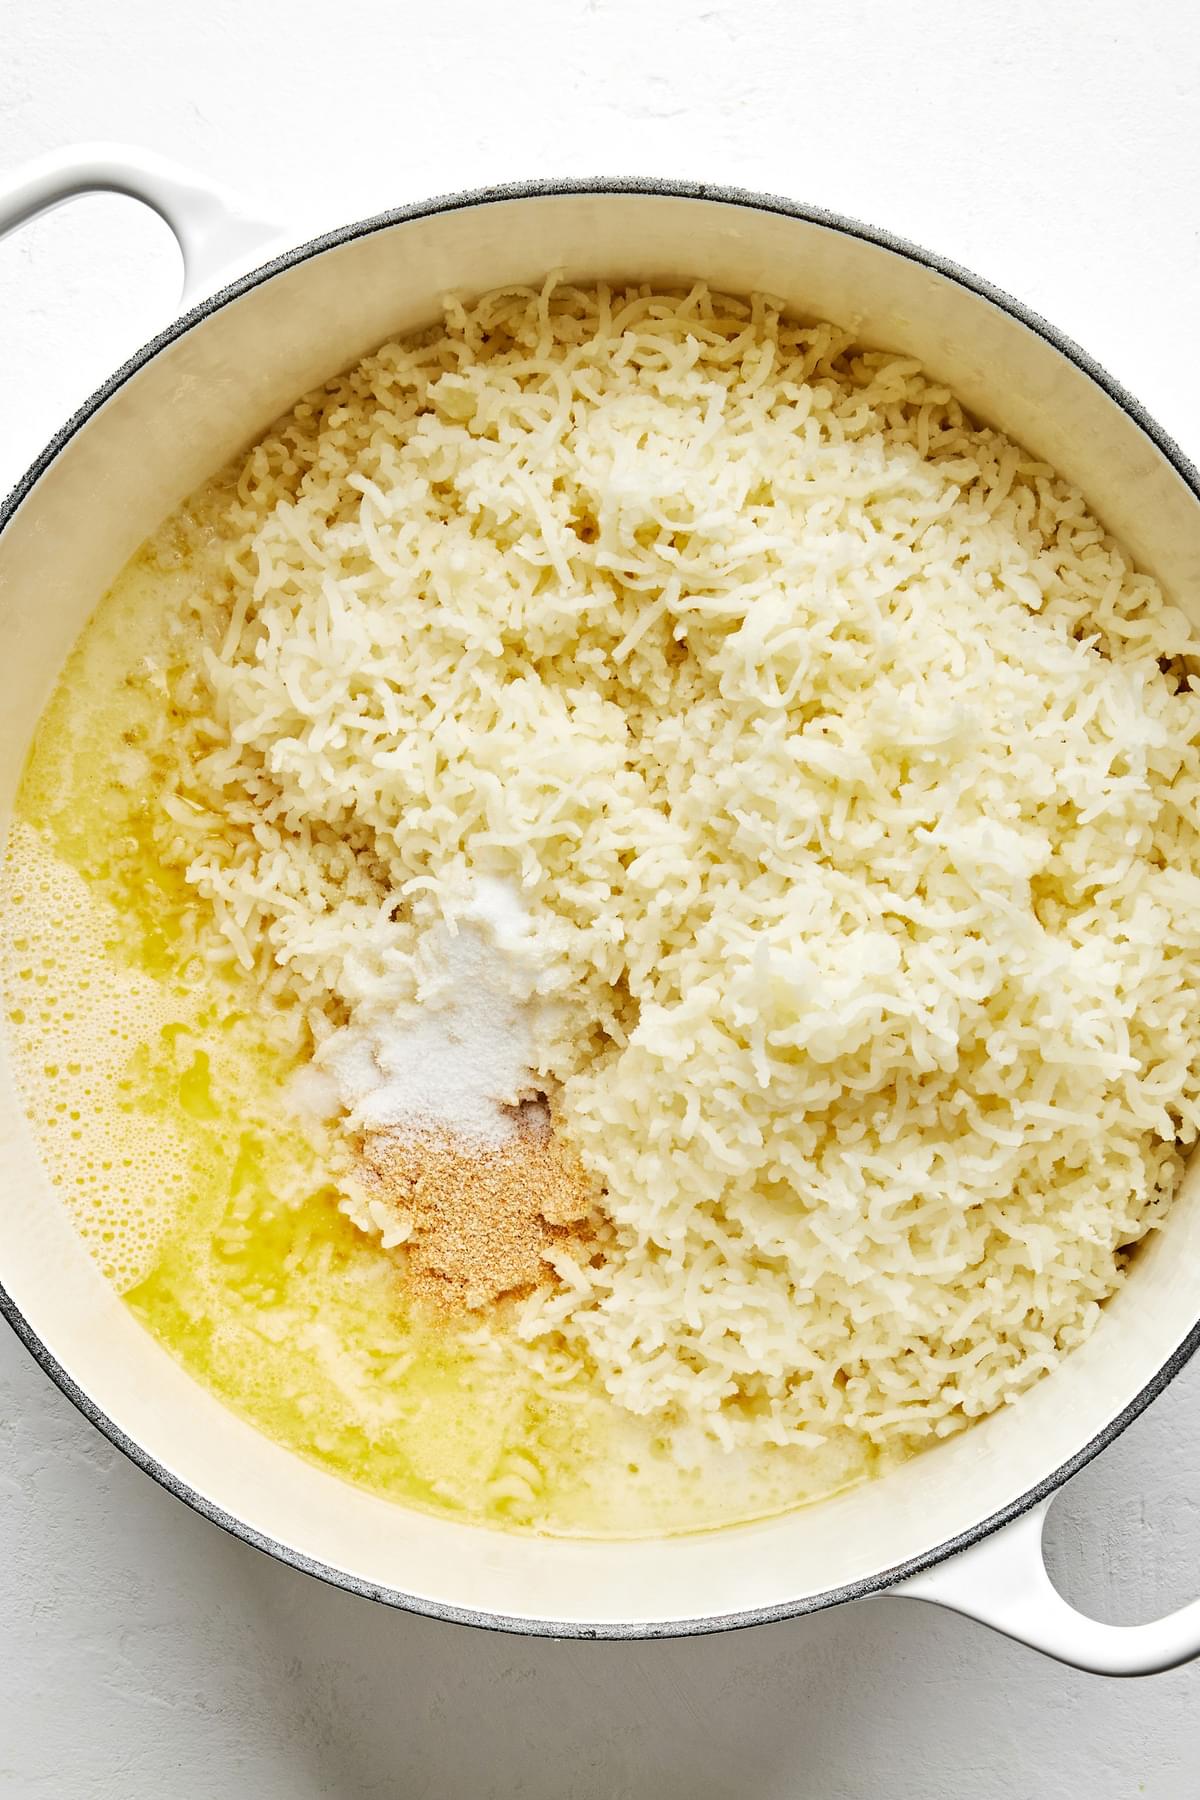 riced potatoes in a pot with warm whole milk, melted butter, salt and garlic powder